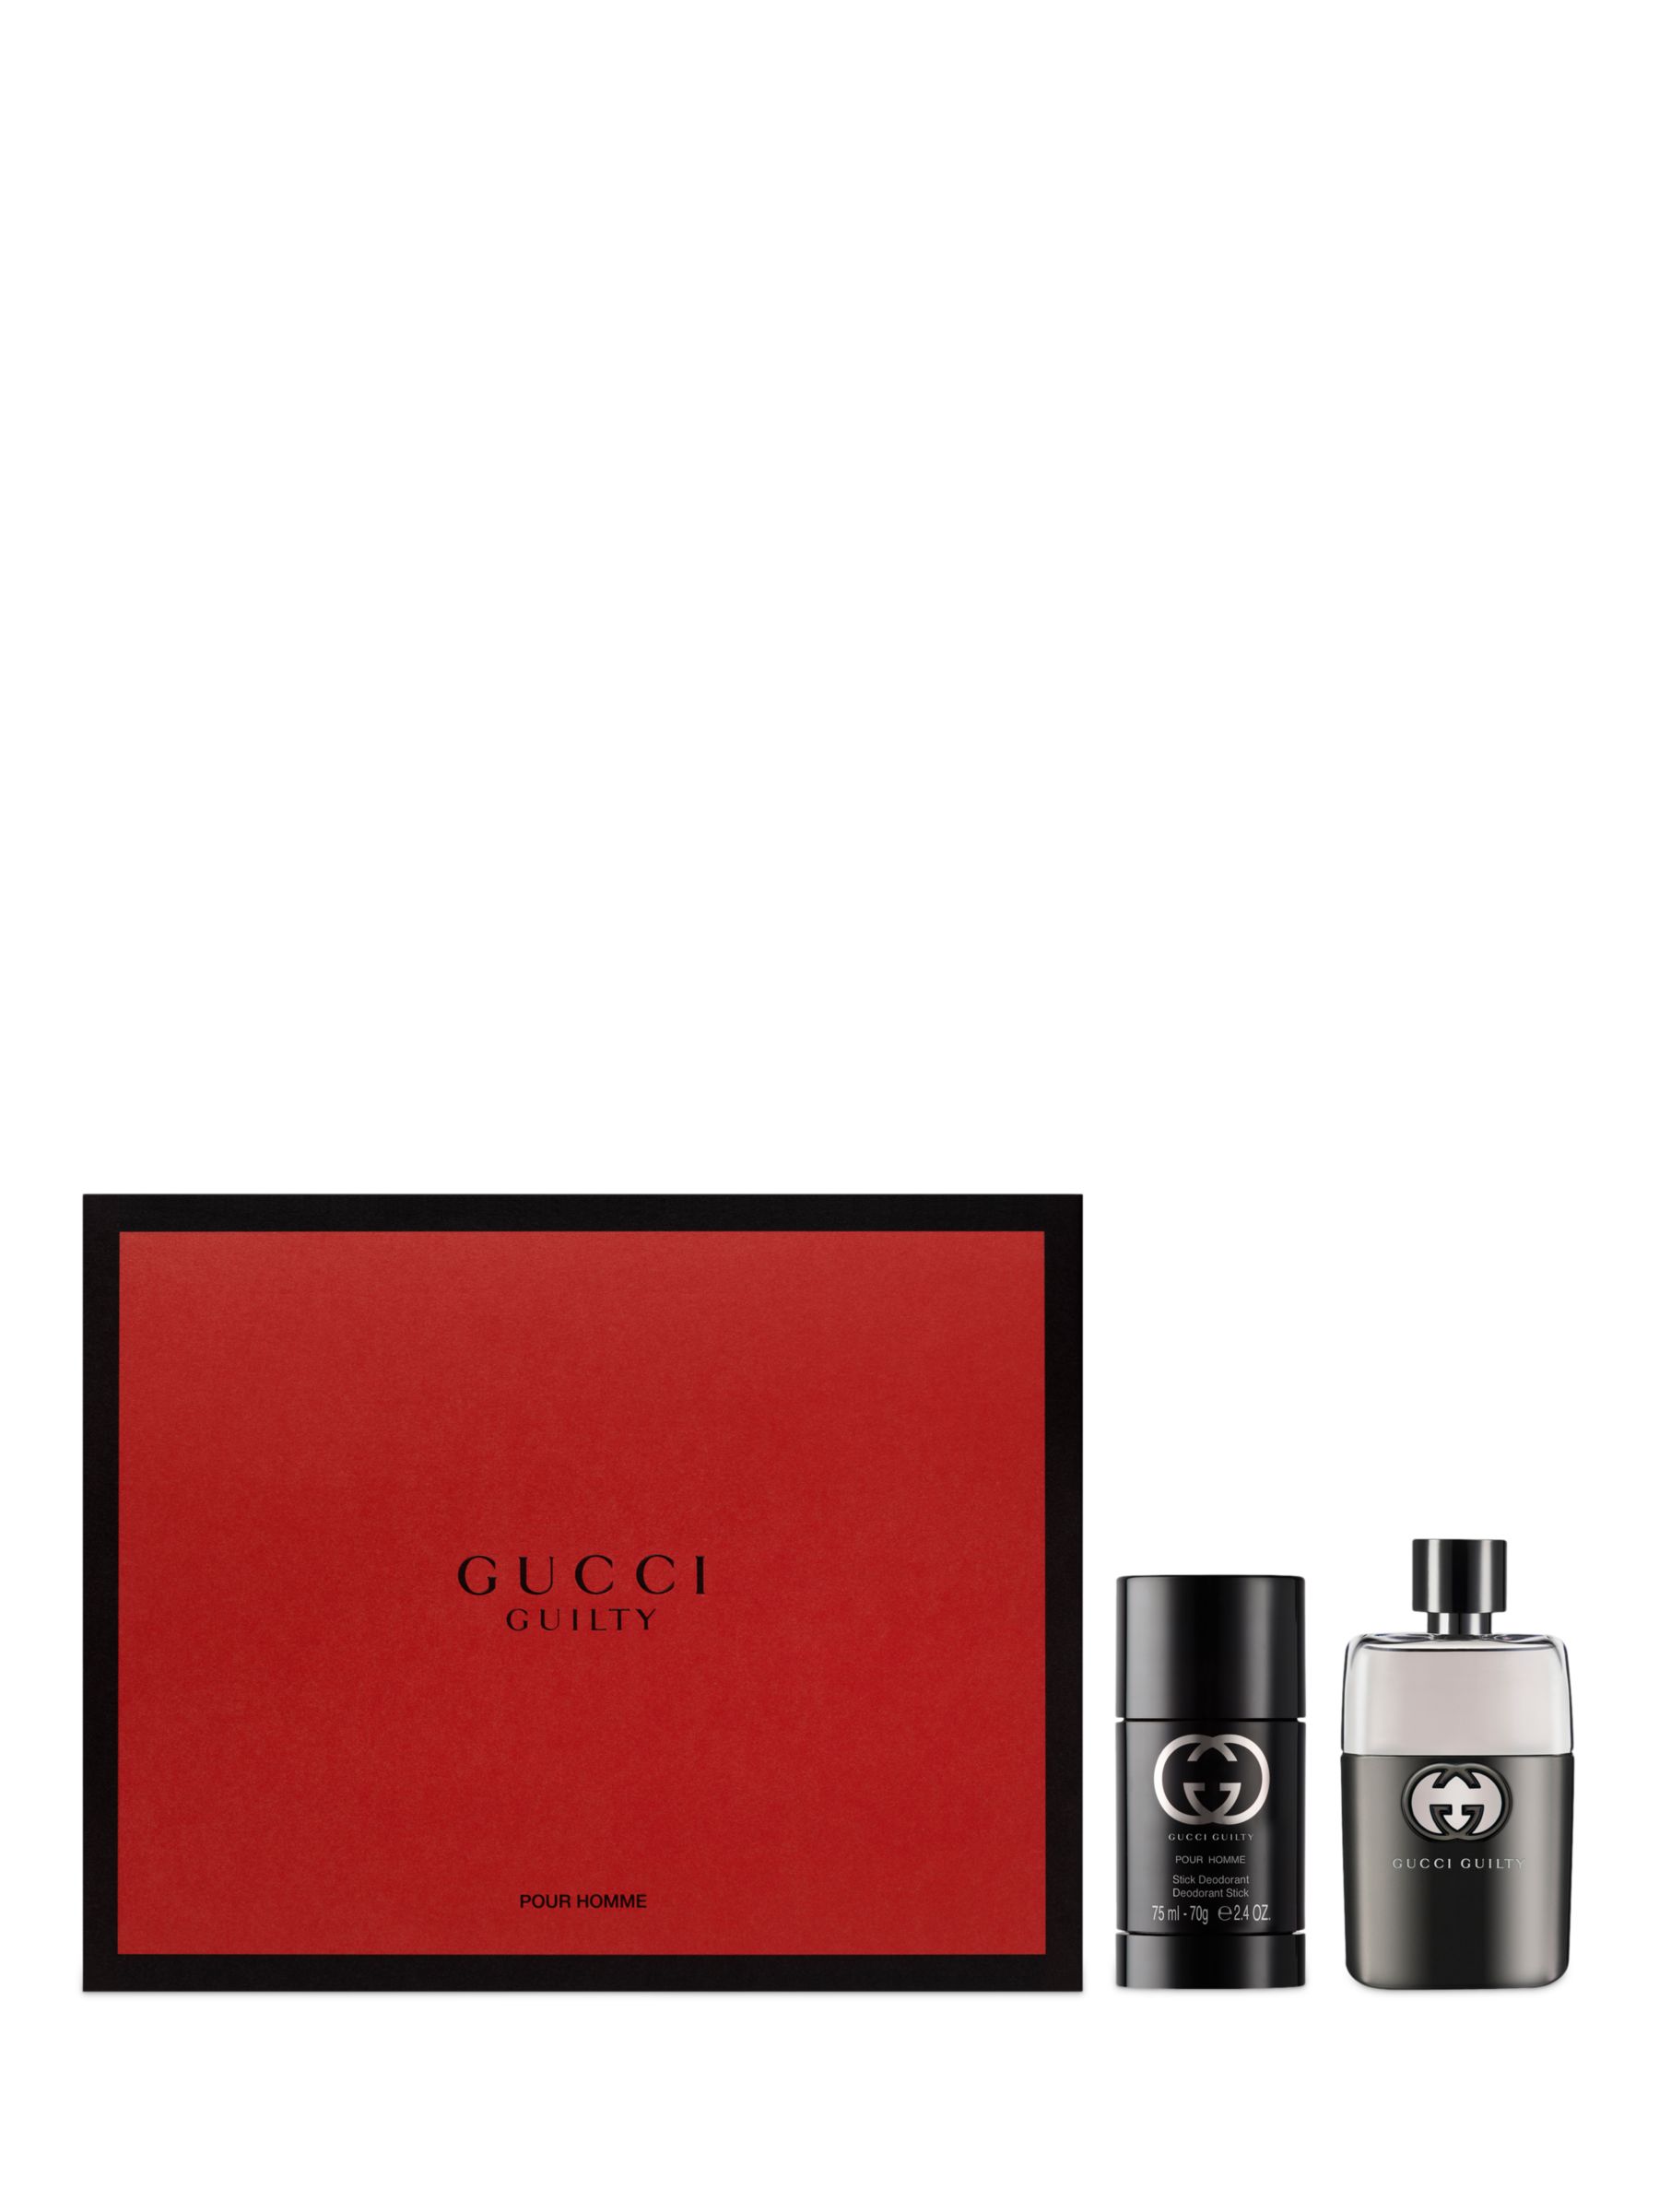 gucci gift sets for him